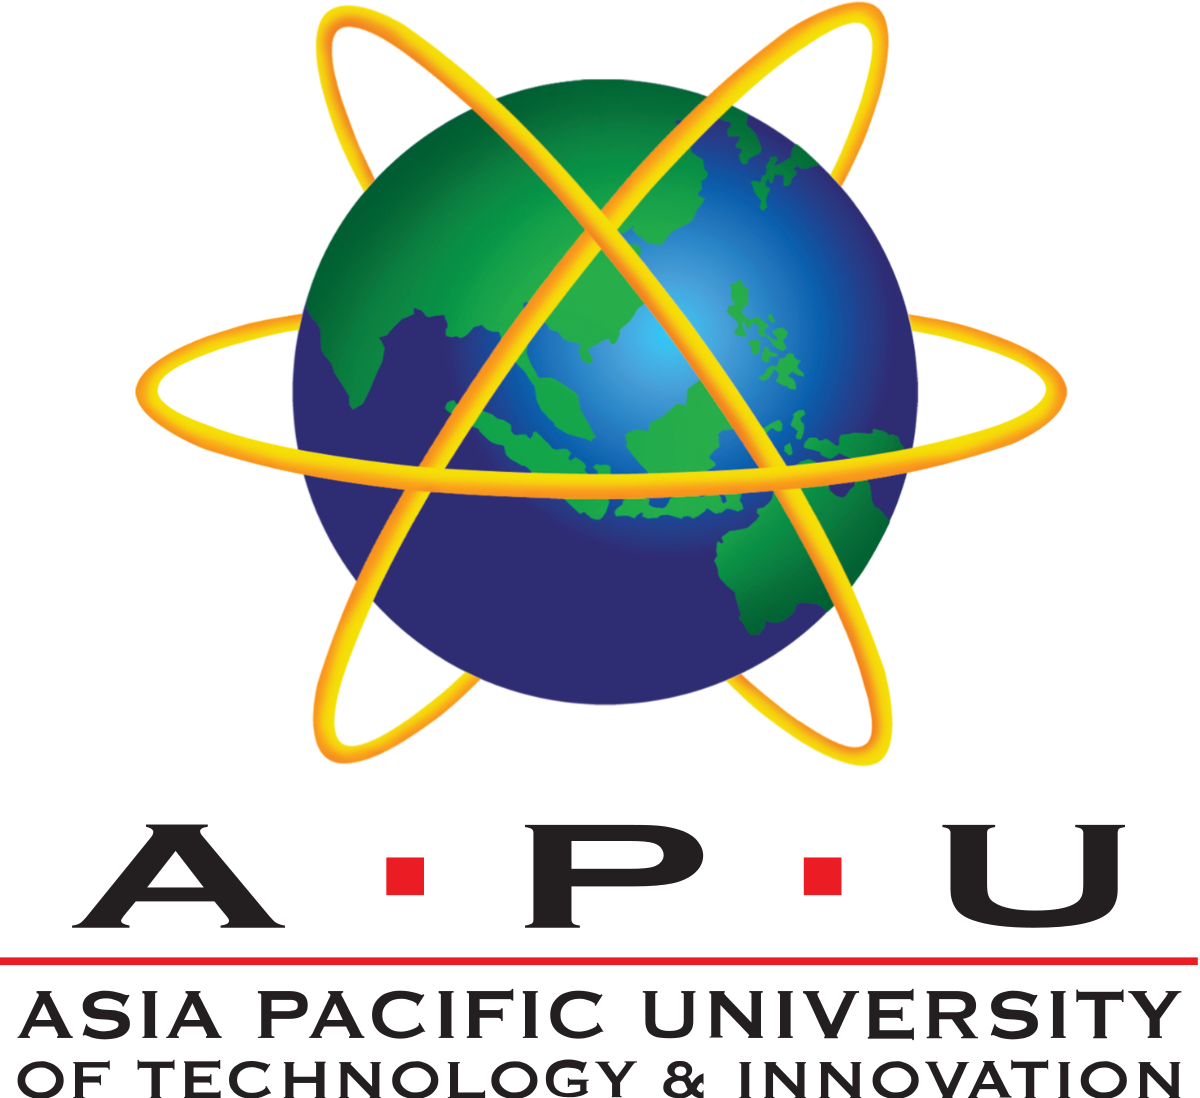 Asia Pacific University of Technology & Innovation